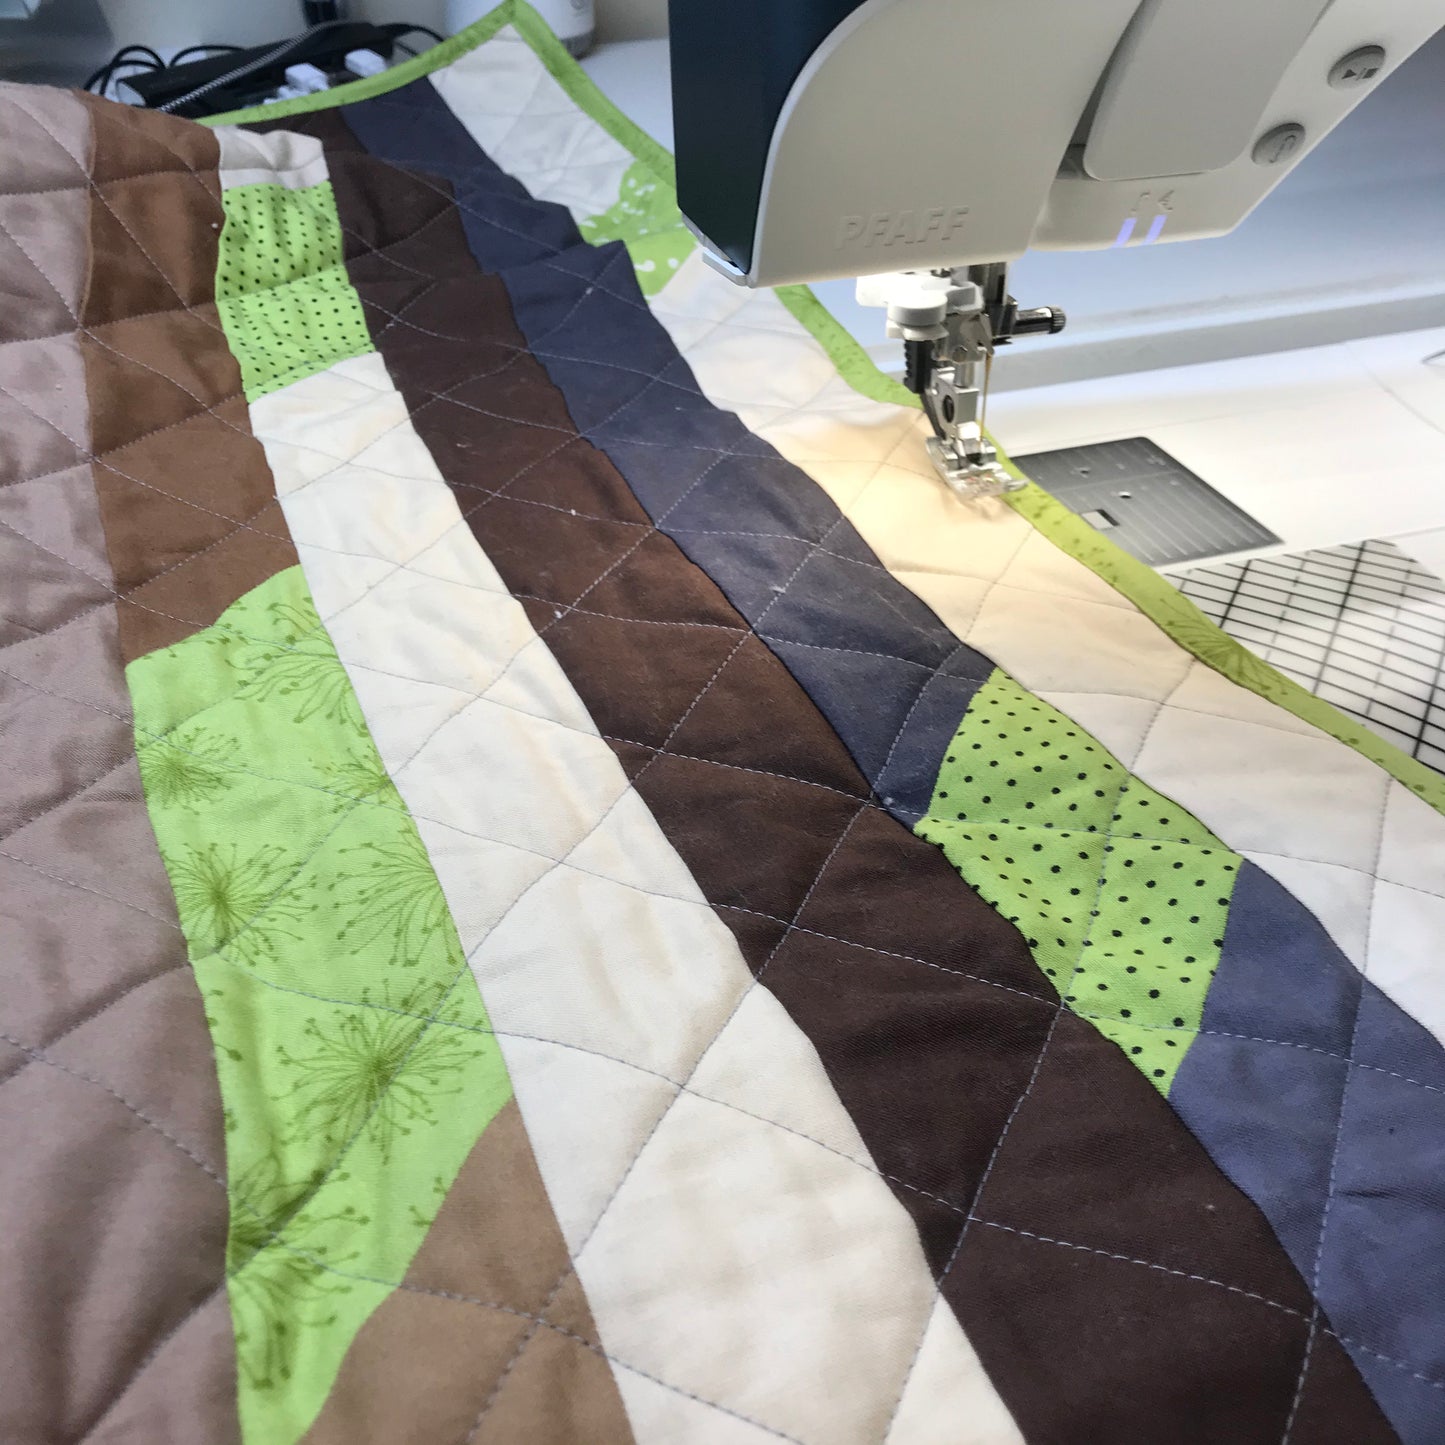 Handmade "Down to Earth" Patchwork Quilt